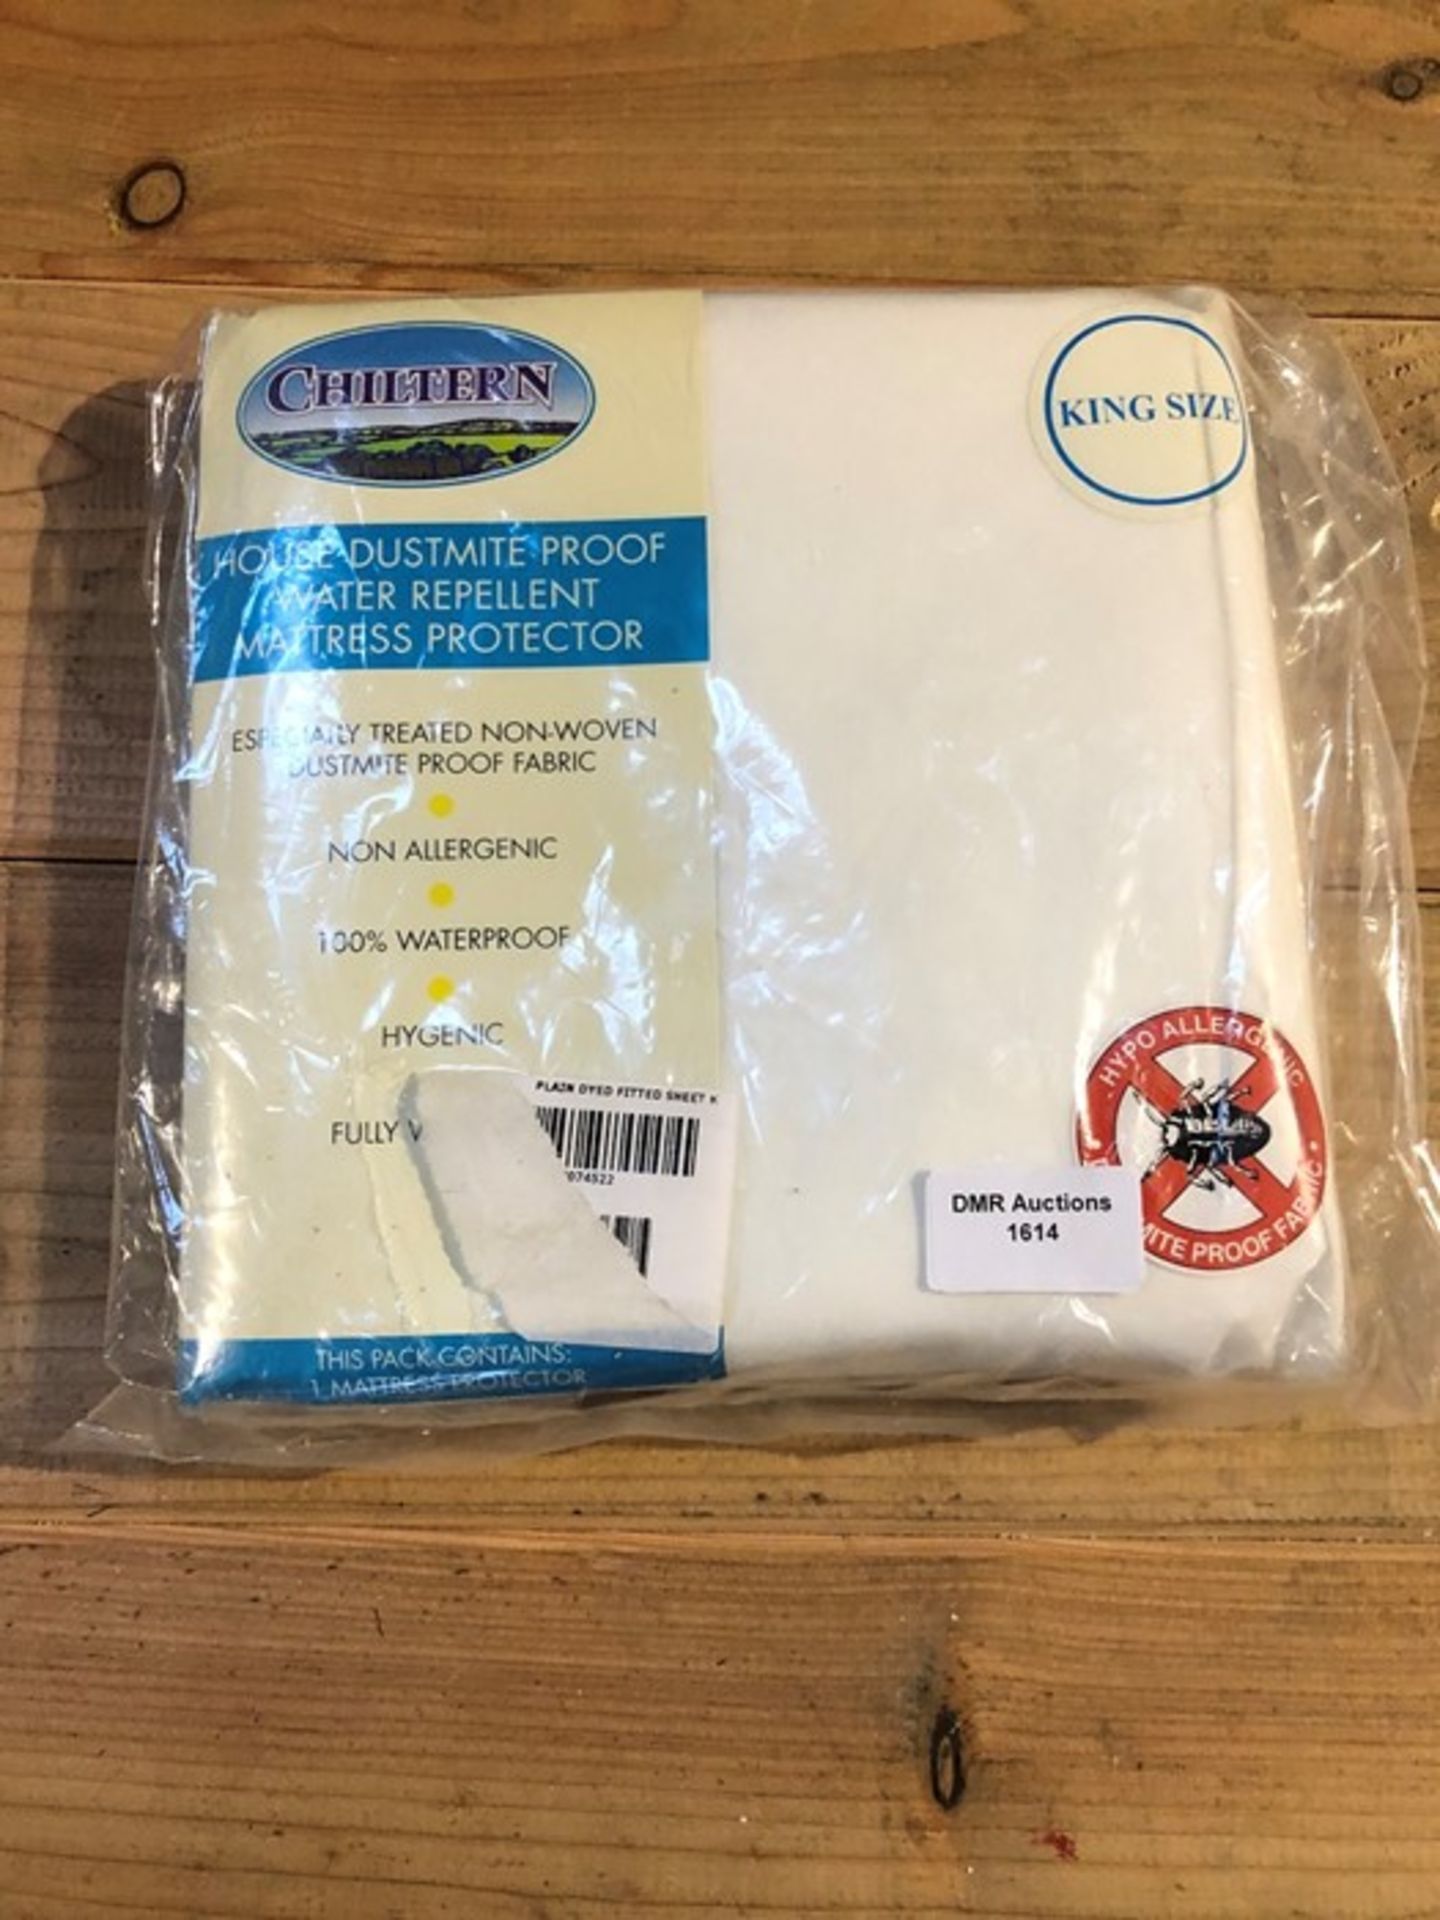 1 BAGGED CHILTERN HOUSE DUSTMITE KING SIZE MATTRESS PROTECTOR (PUBLIC VIEWING AVAILABLE) - Image 2 of 3